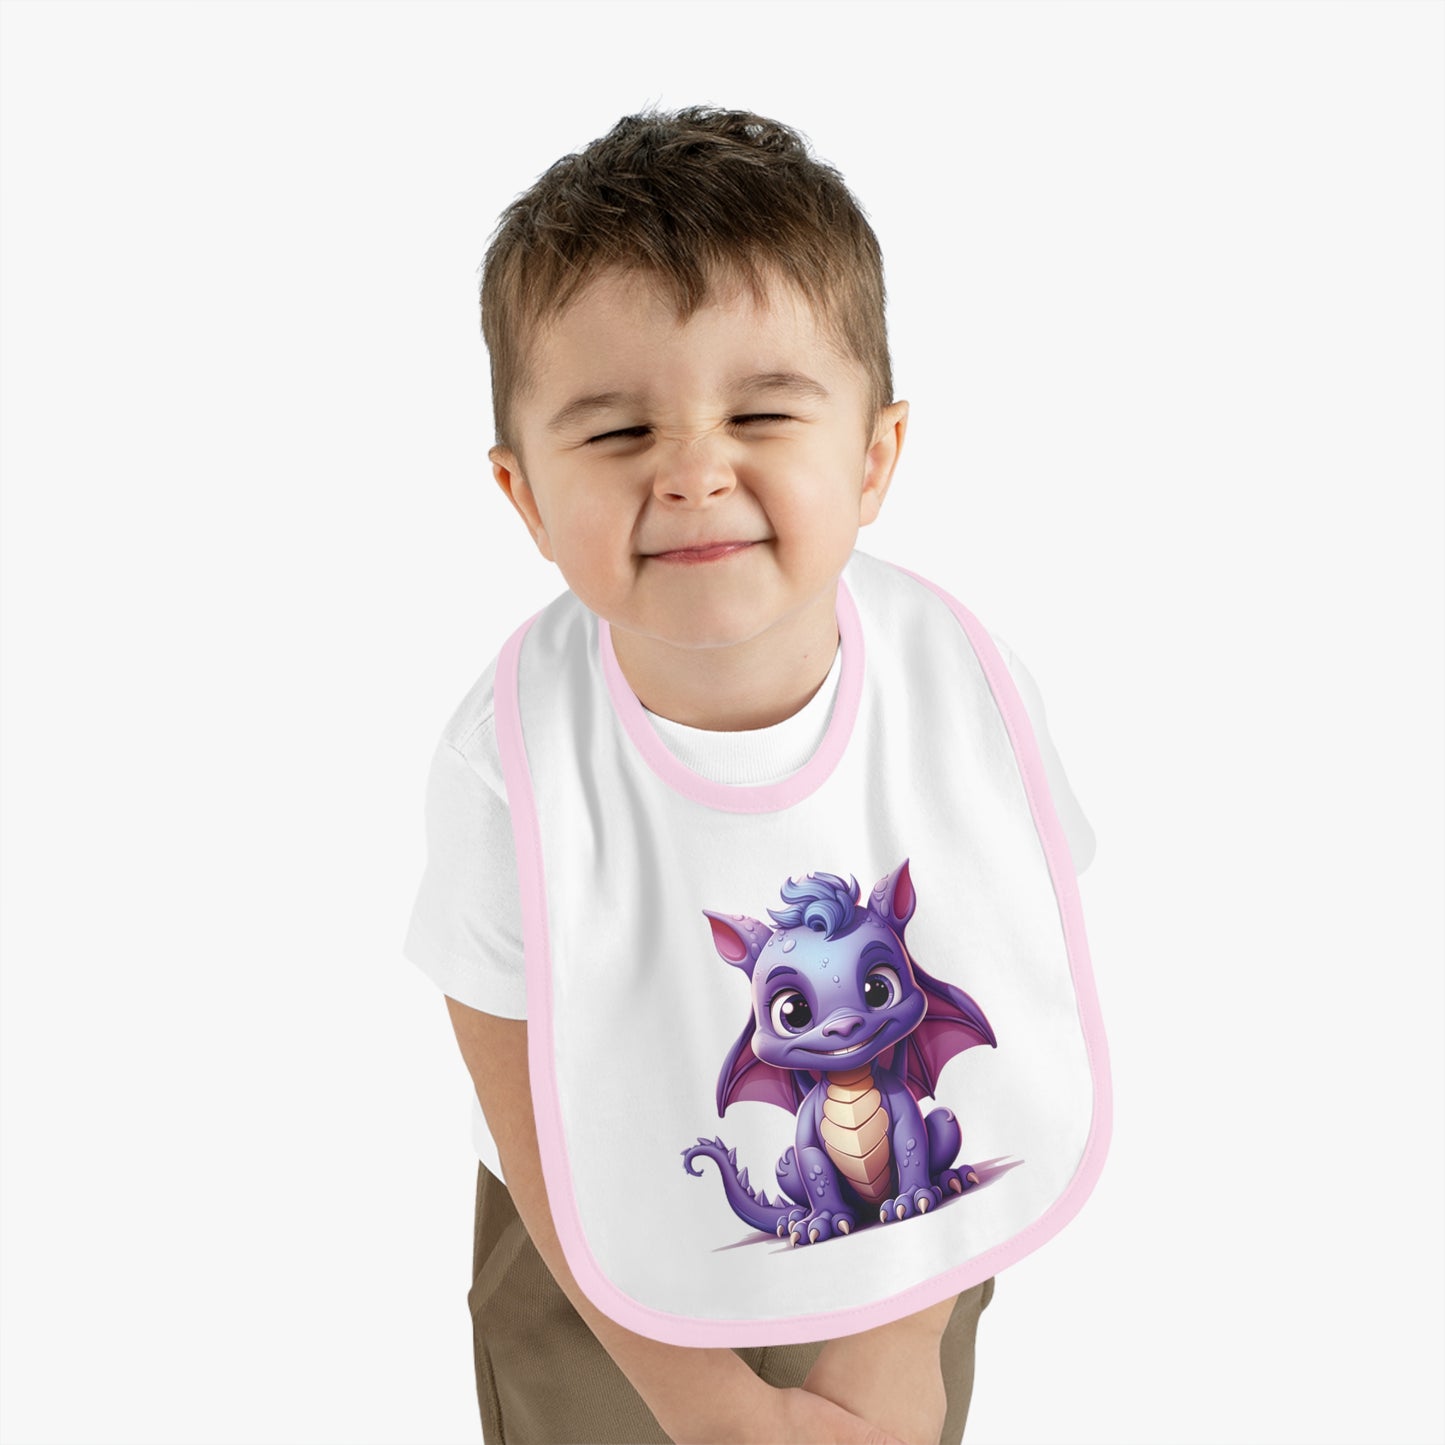 A white 100% cotton baby bib trimmed in pink - with a purple baby Happy dragon in the center - a large bib super cute.